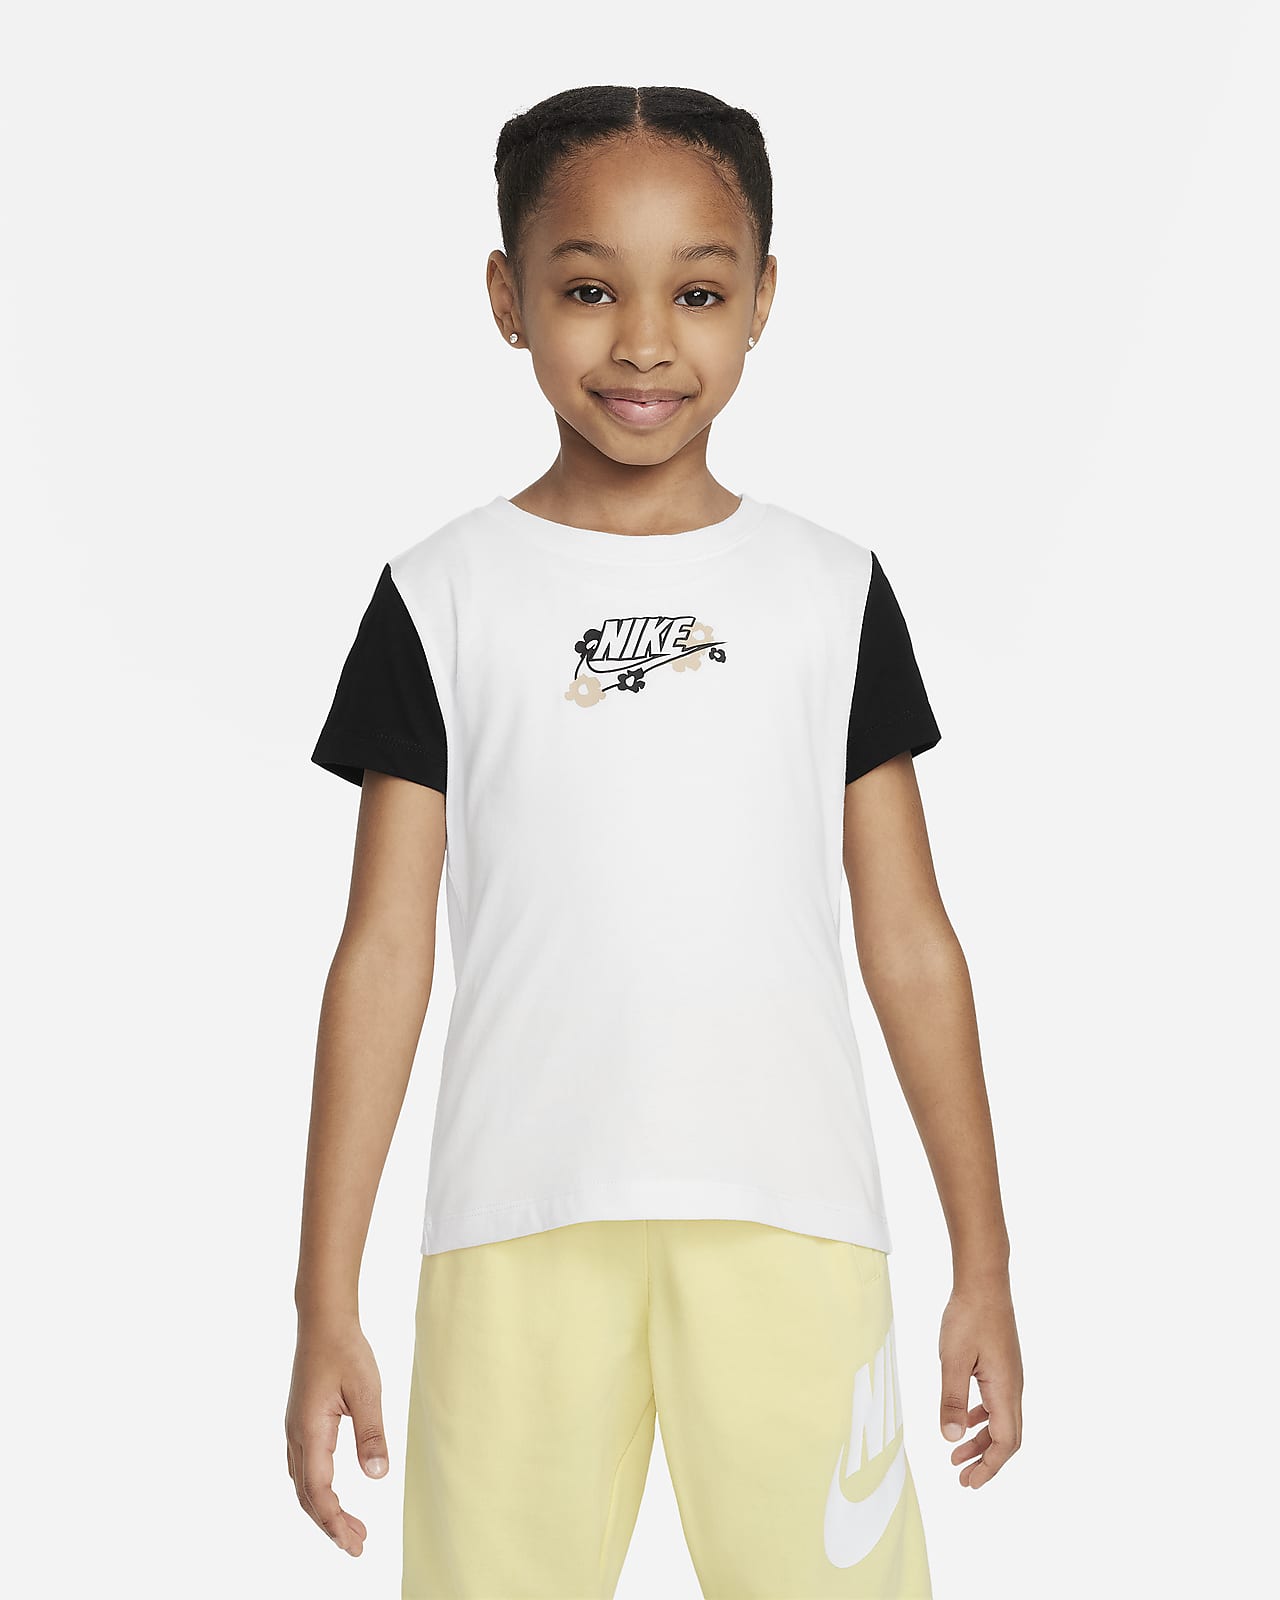 Nike "Your Move" Little Kids' Graphic T-Shirt